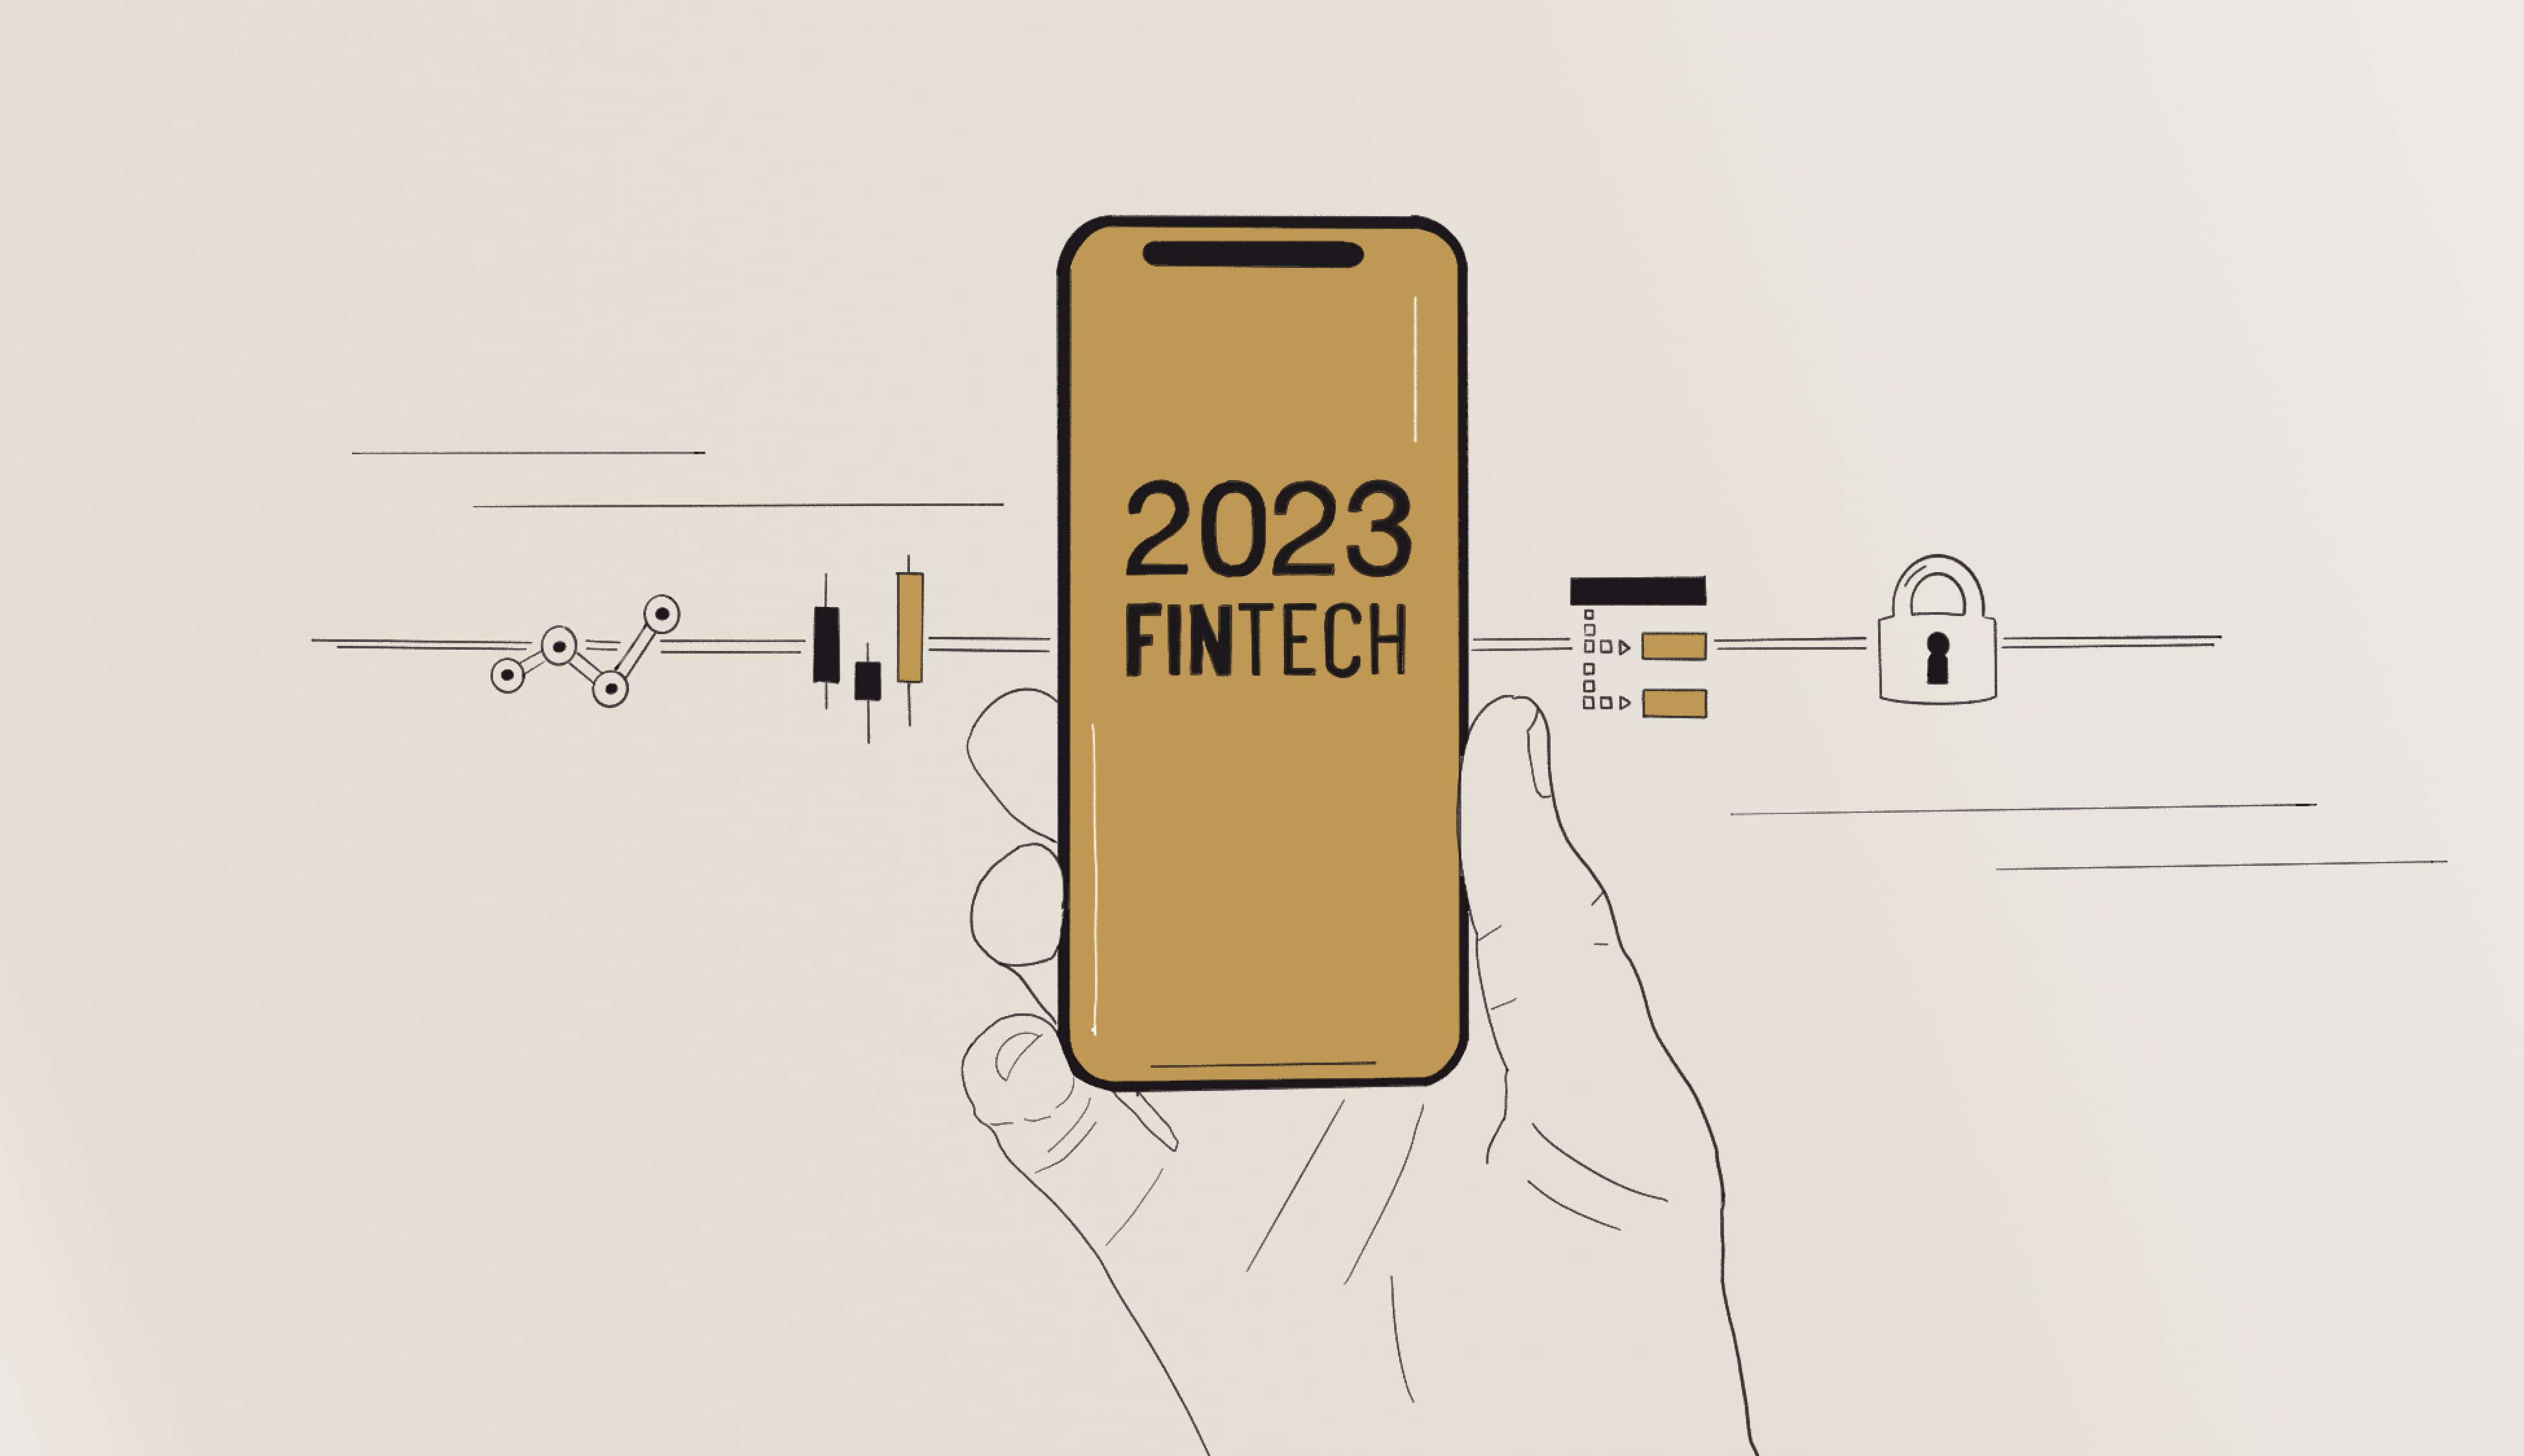 What to expect from fintech in 2023?